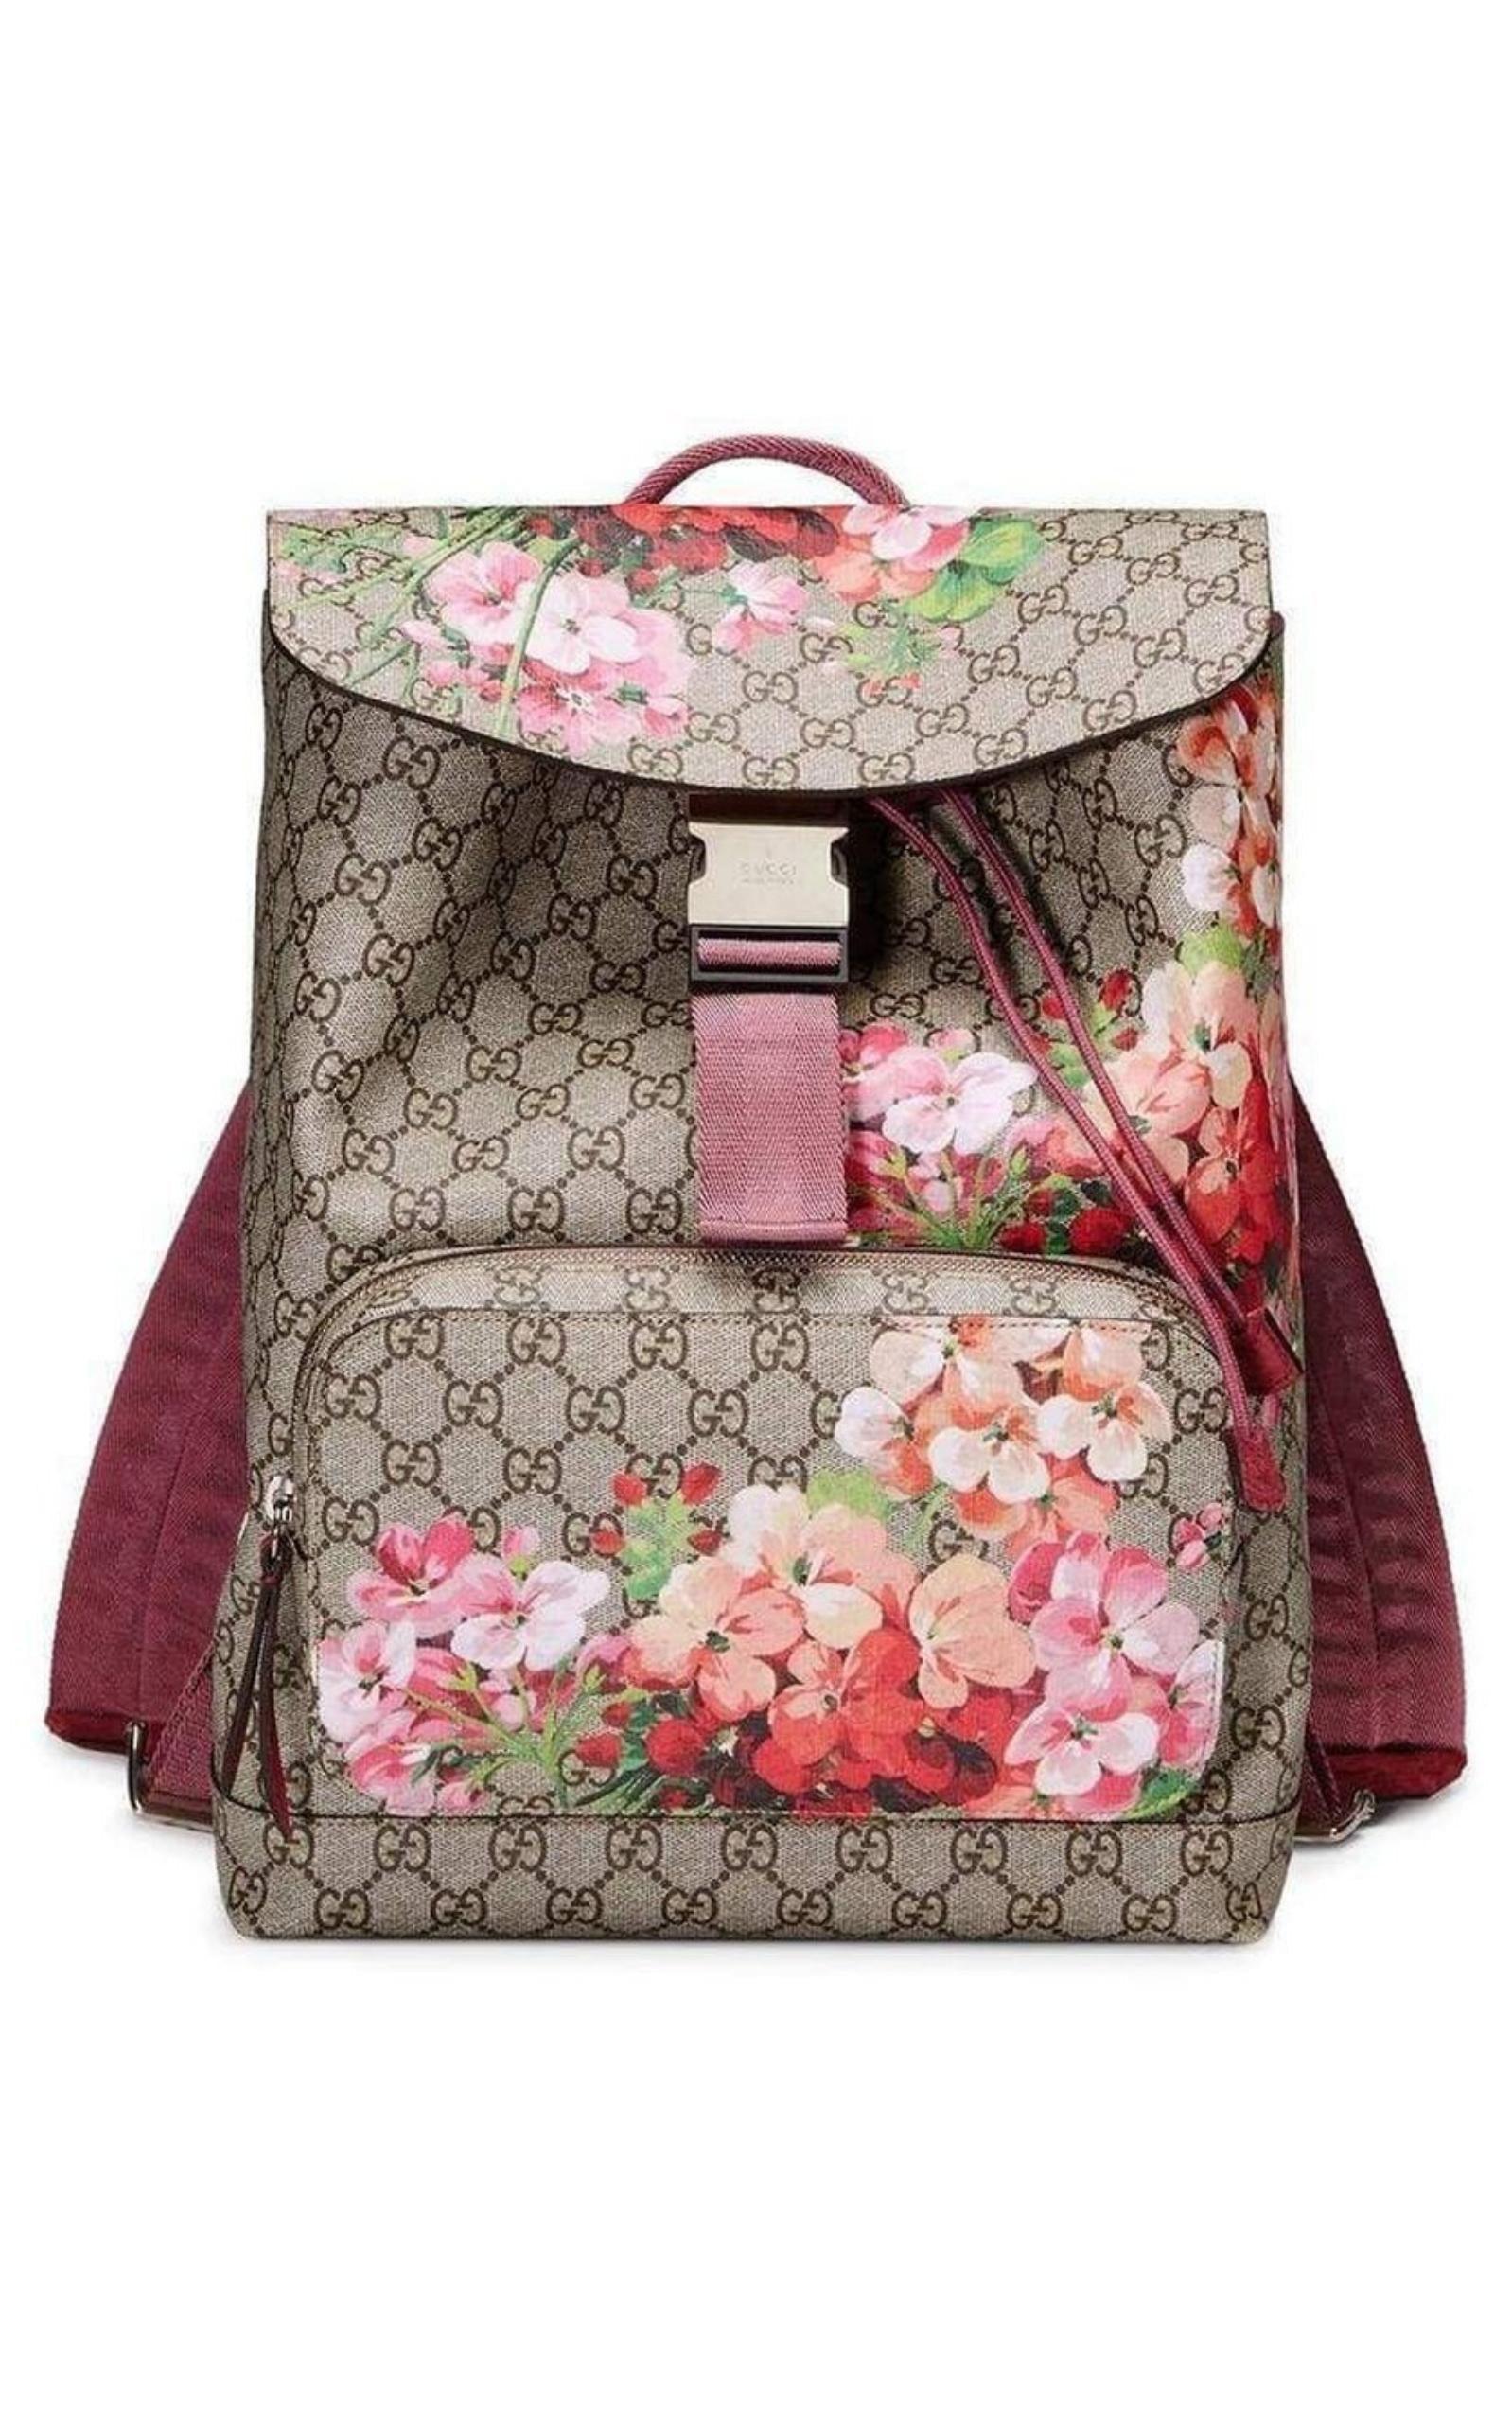 pink gucci backpack